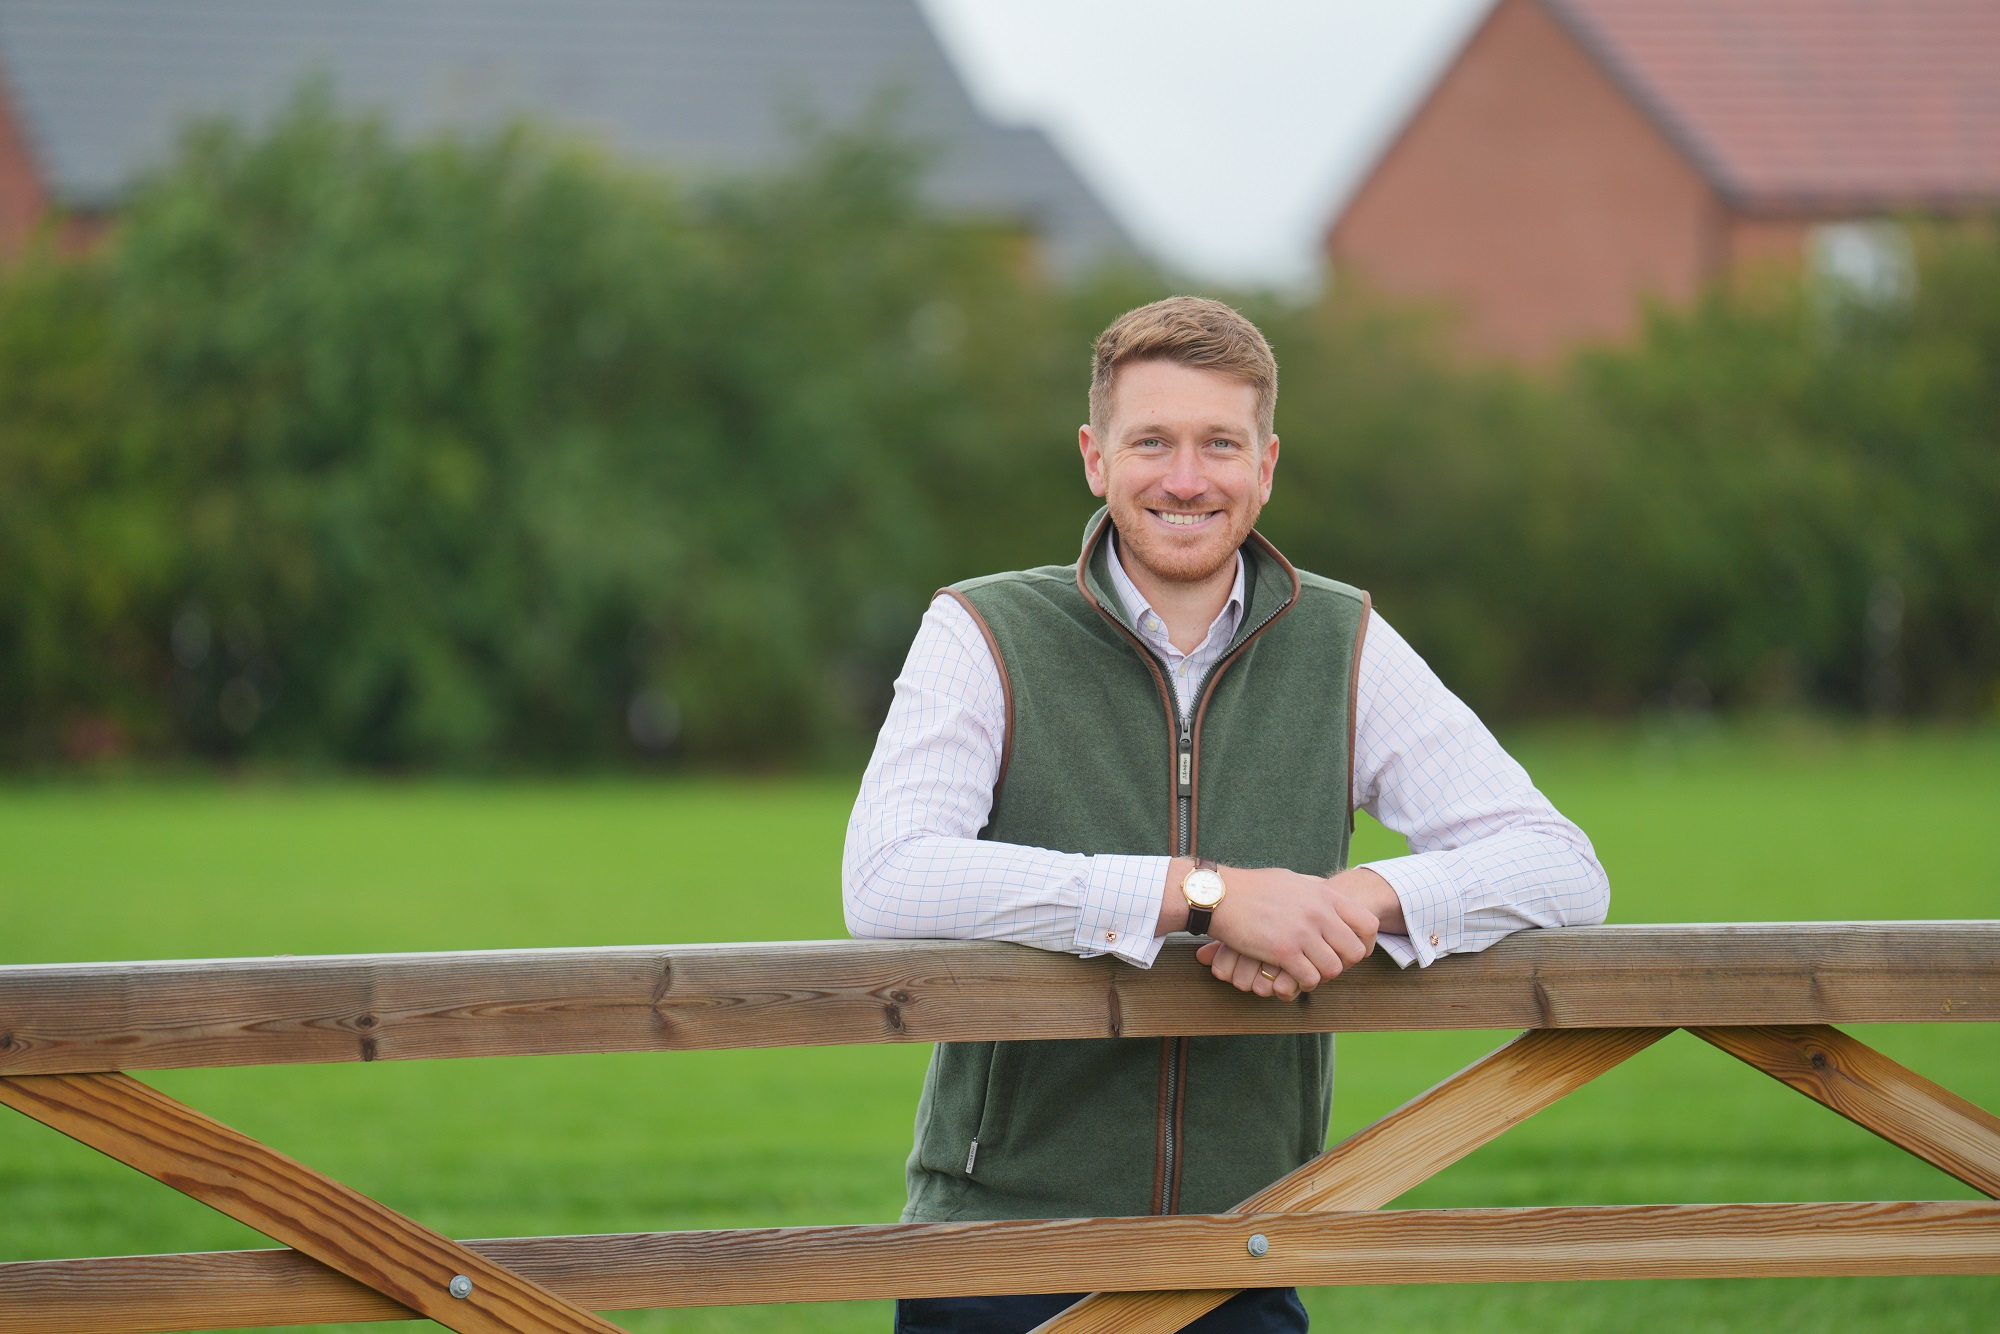 Land promoter Catesby Estates working with landowners